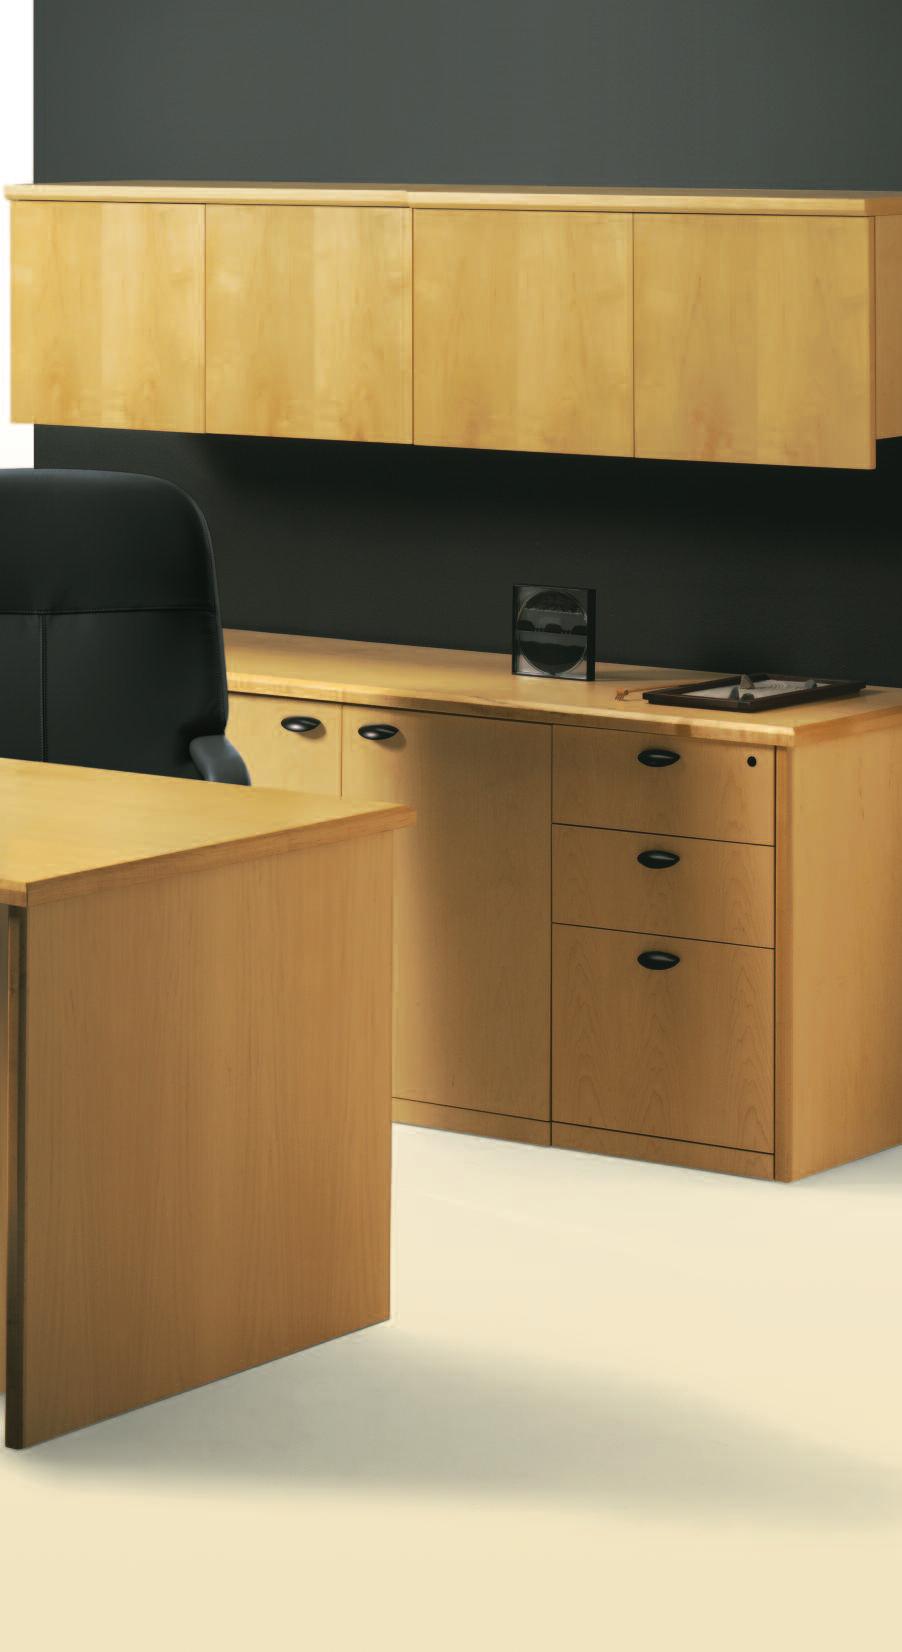 Darwin wood casegoods are built to survive years of office wear and tear.